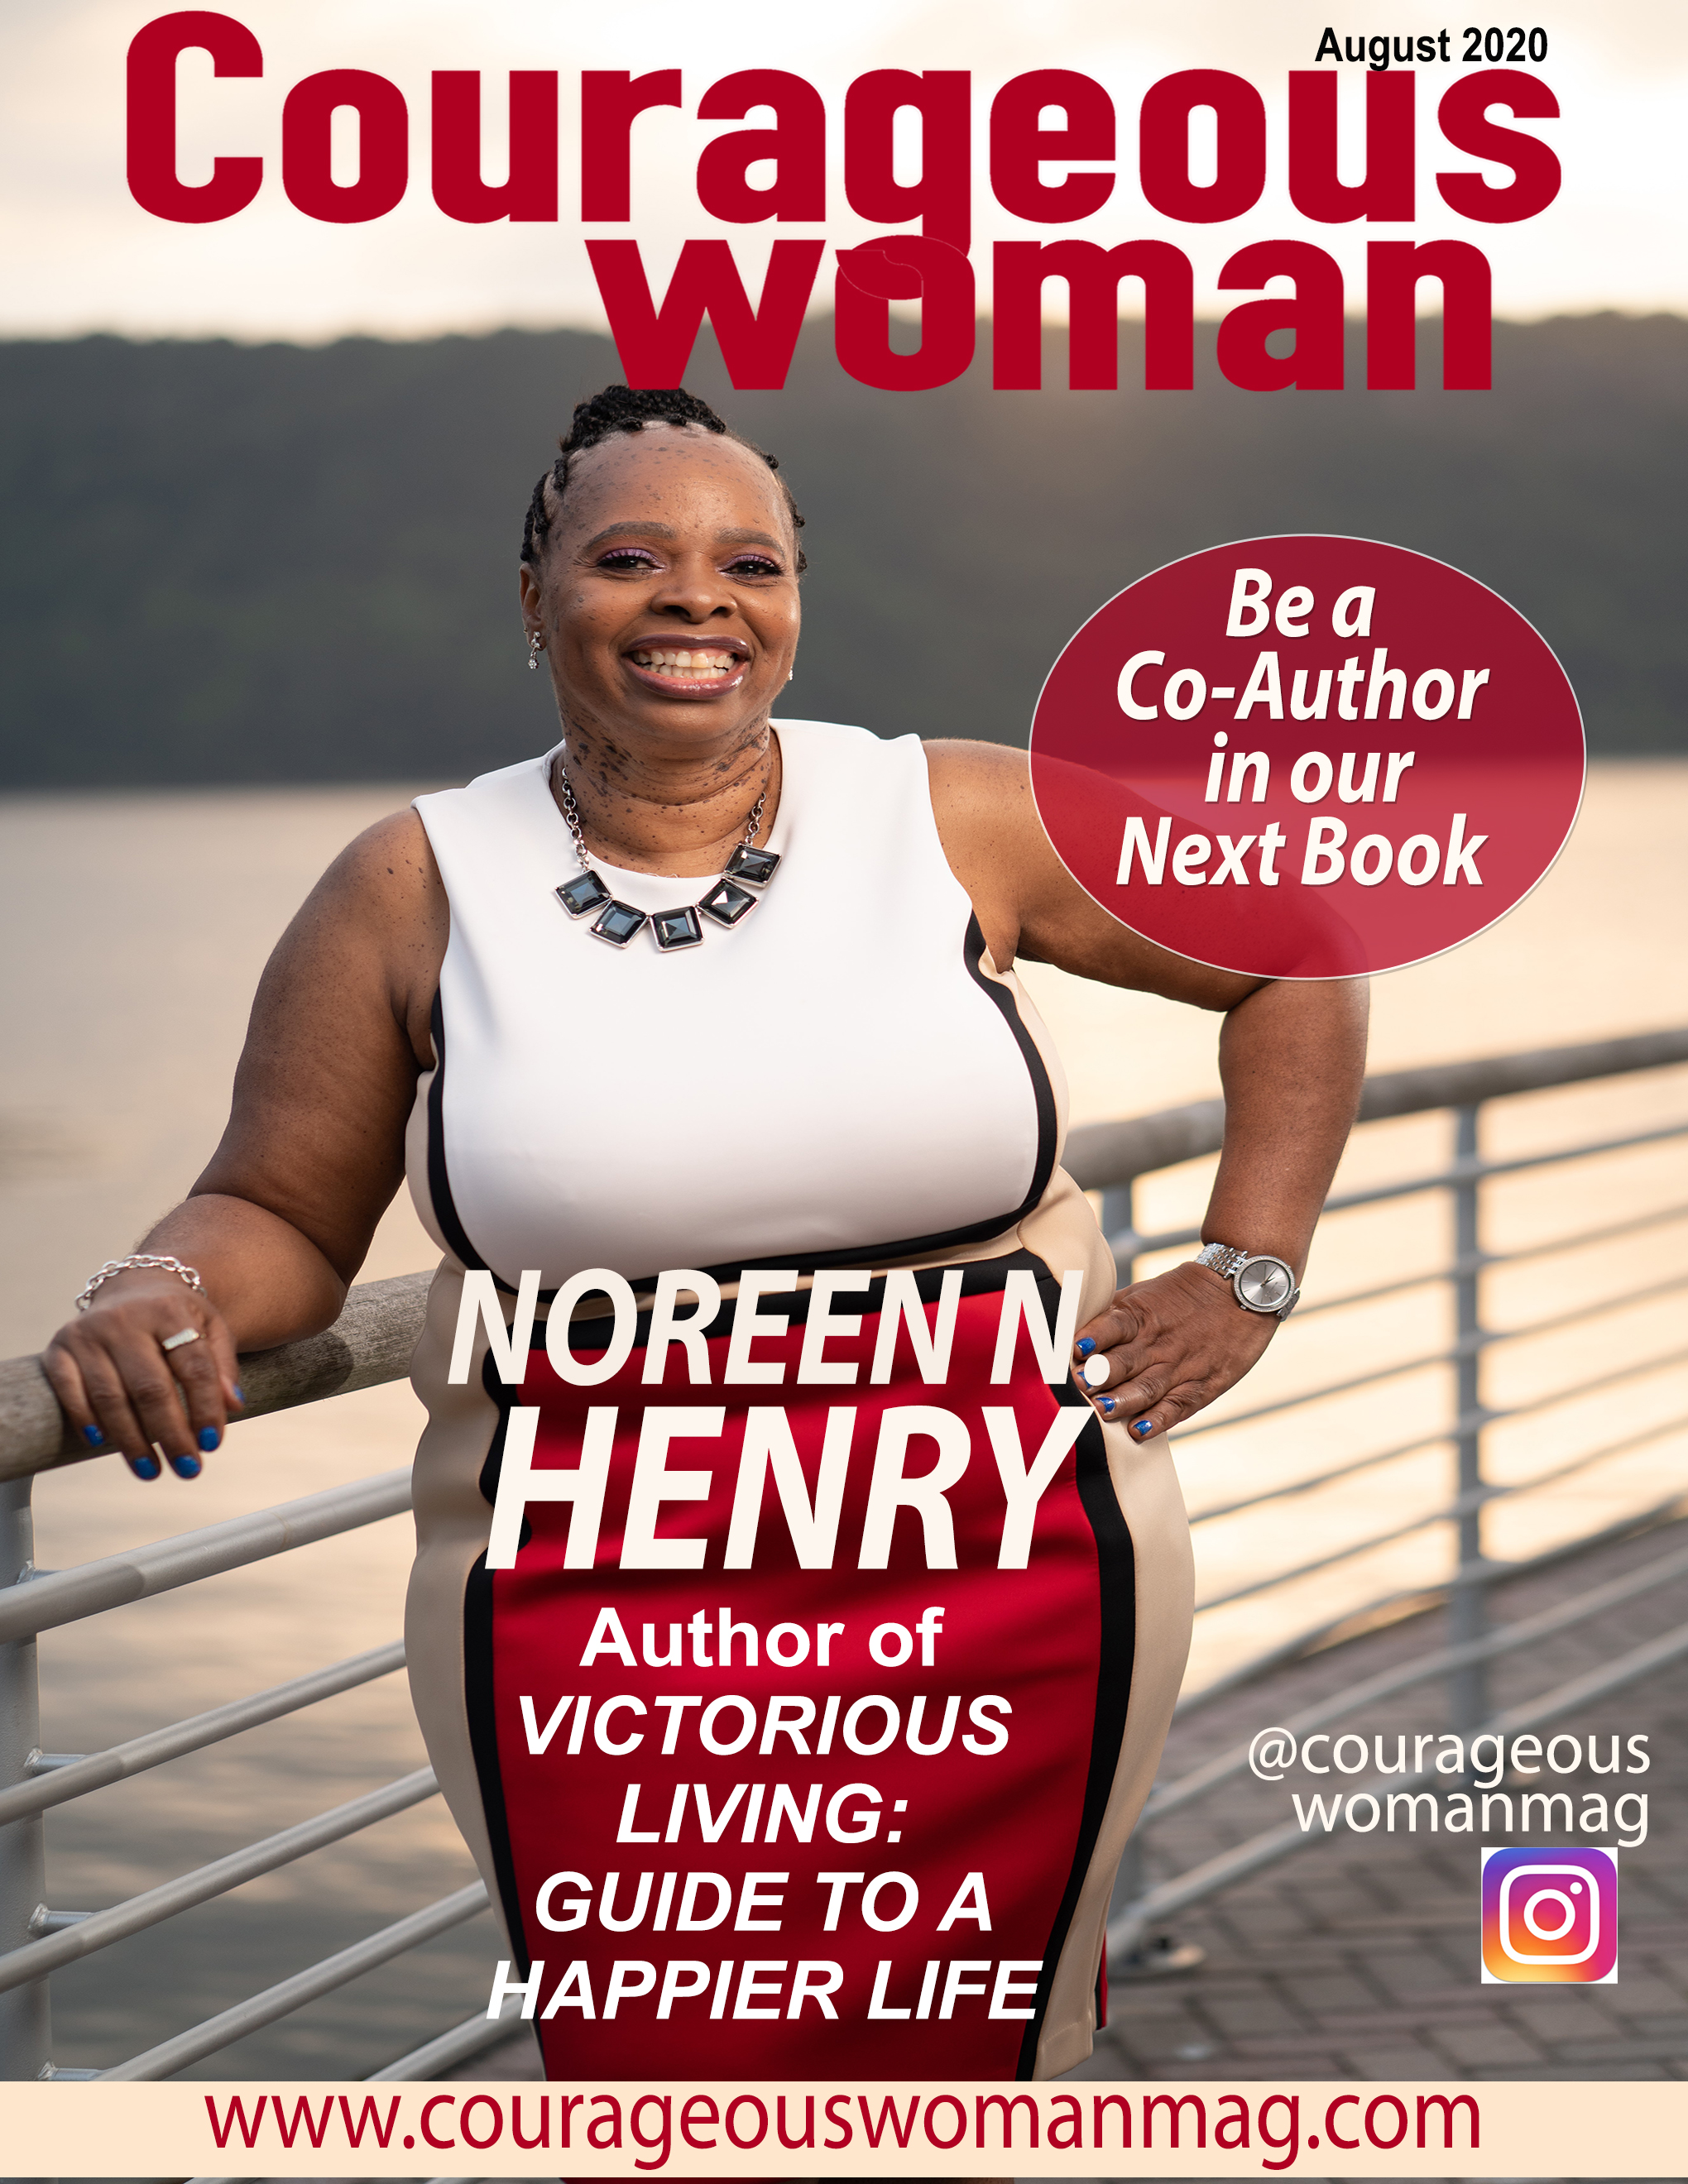 Noreen-n-Henry-Courageous-woman-magazine